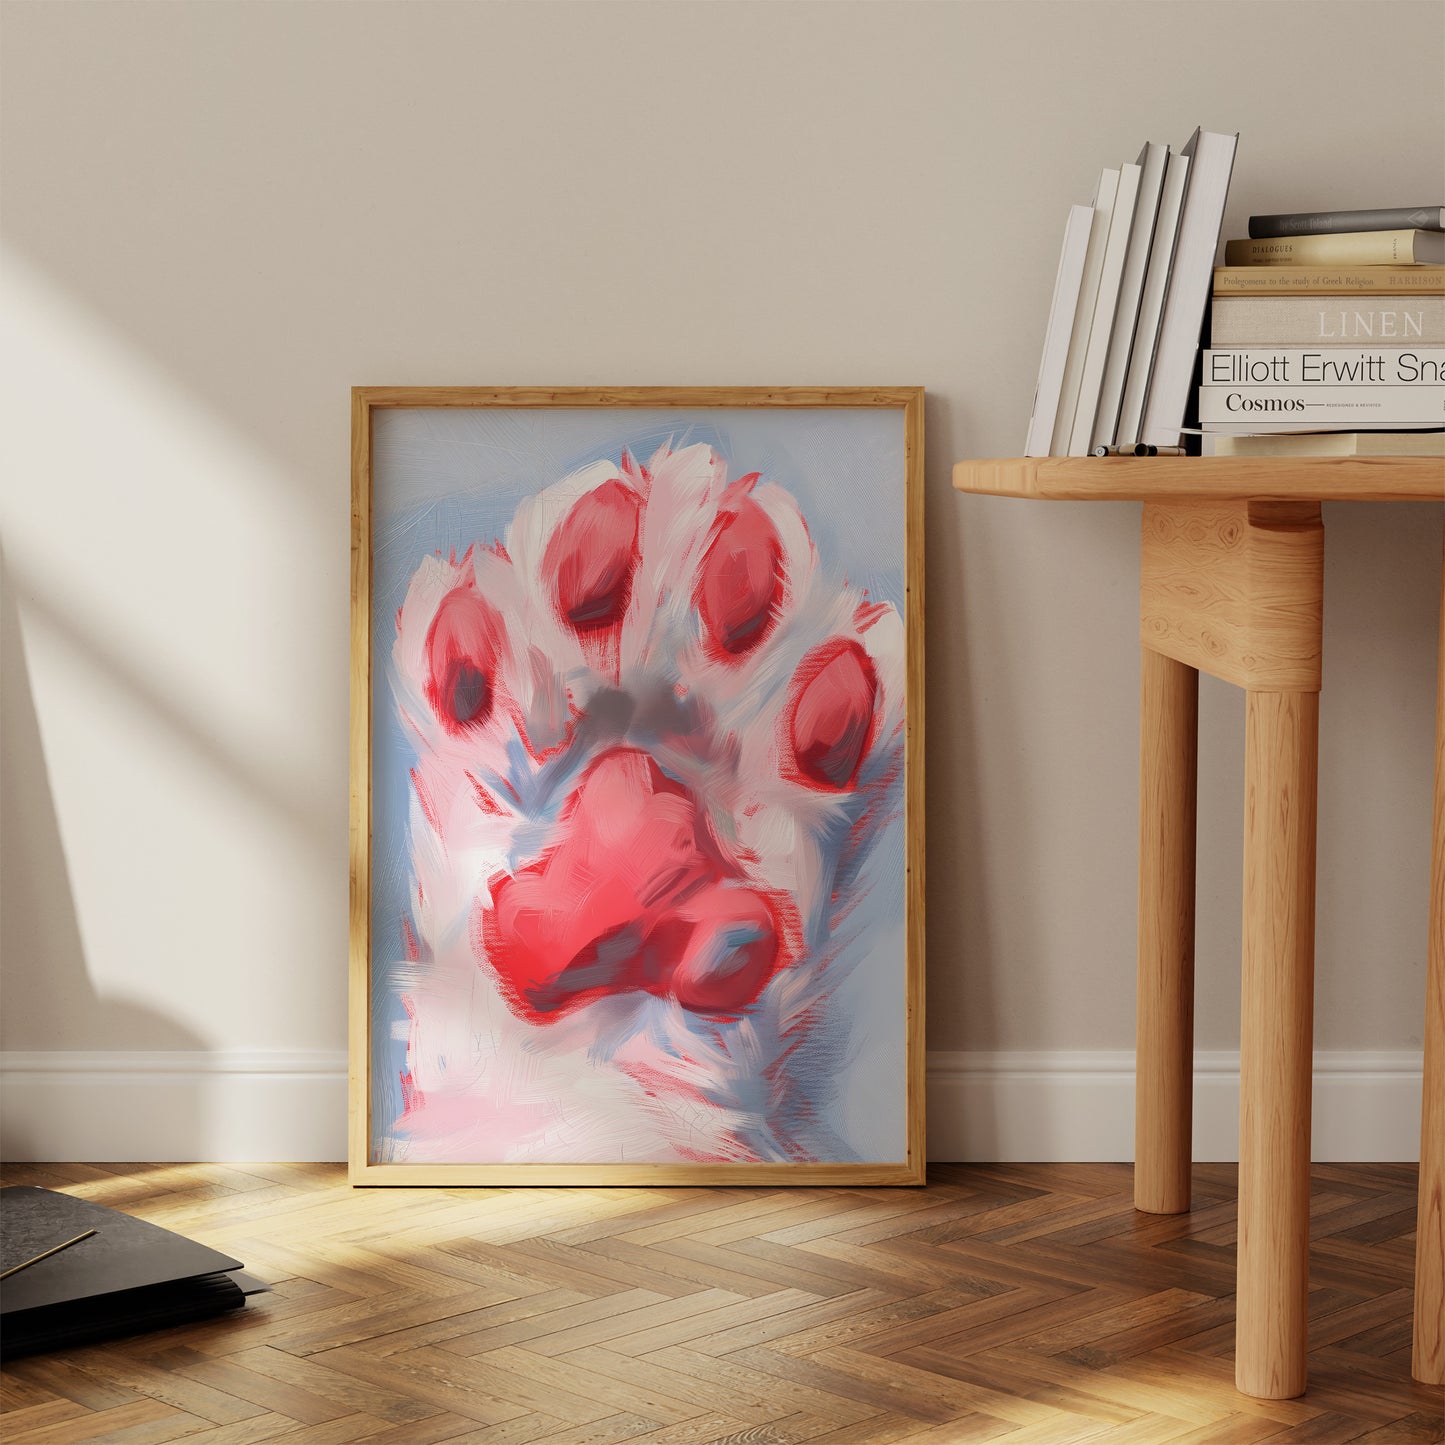 A large framed painting of a red paw print leaning against a wall in a sunny room.